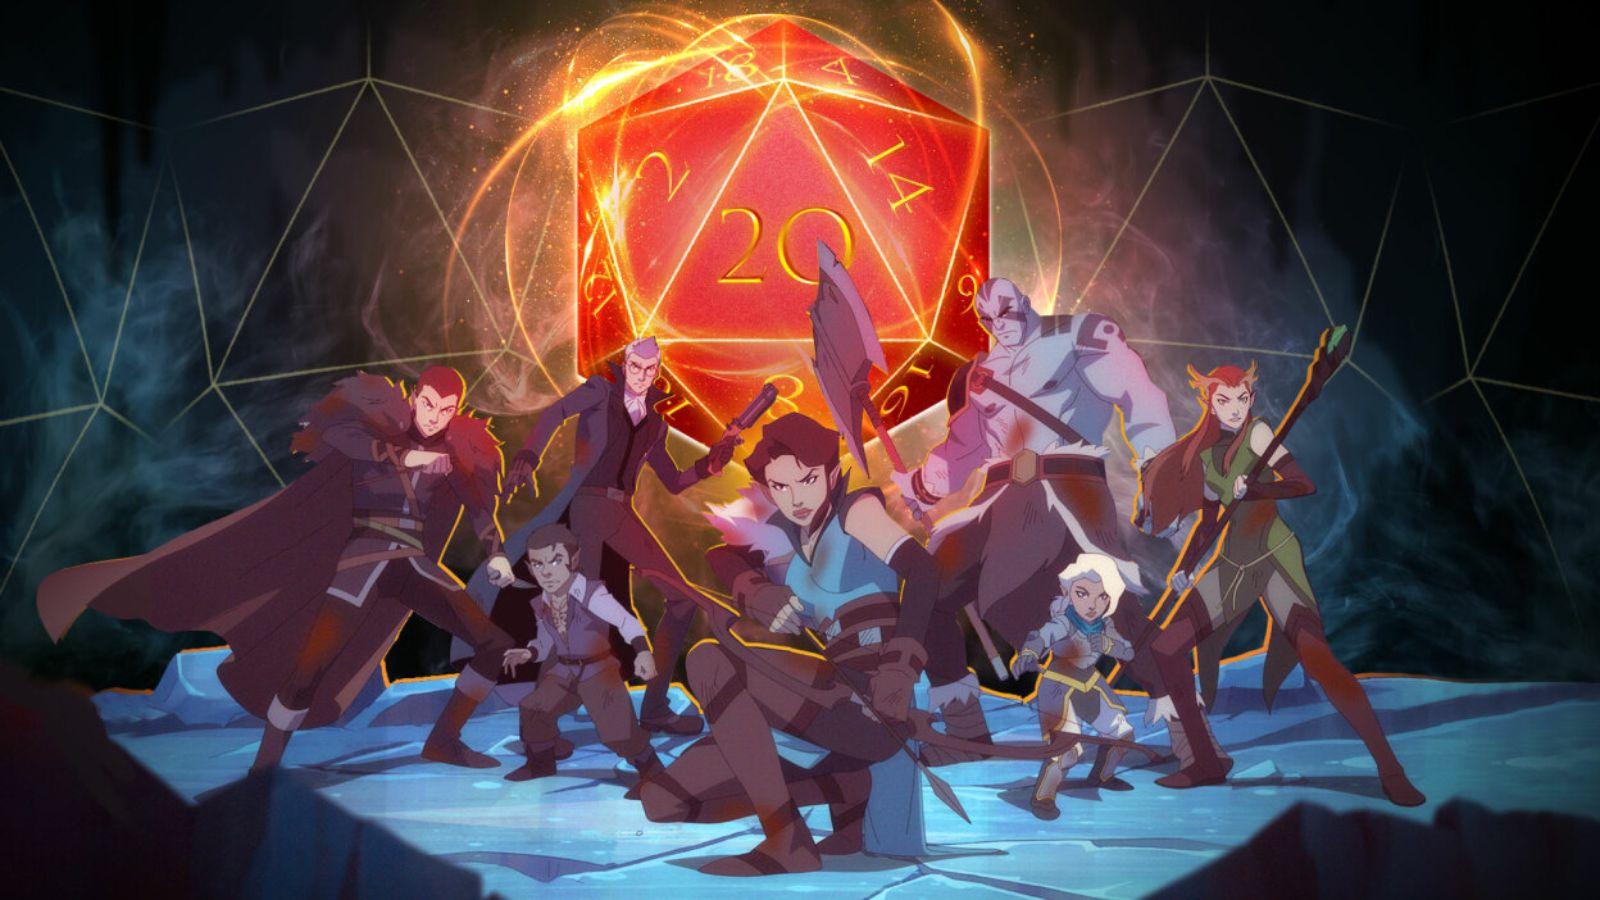 No Spoilers] The Legend of Vox Machina season 2 confirmed by